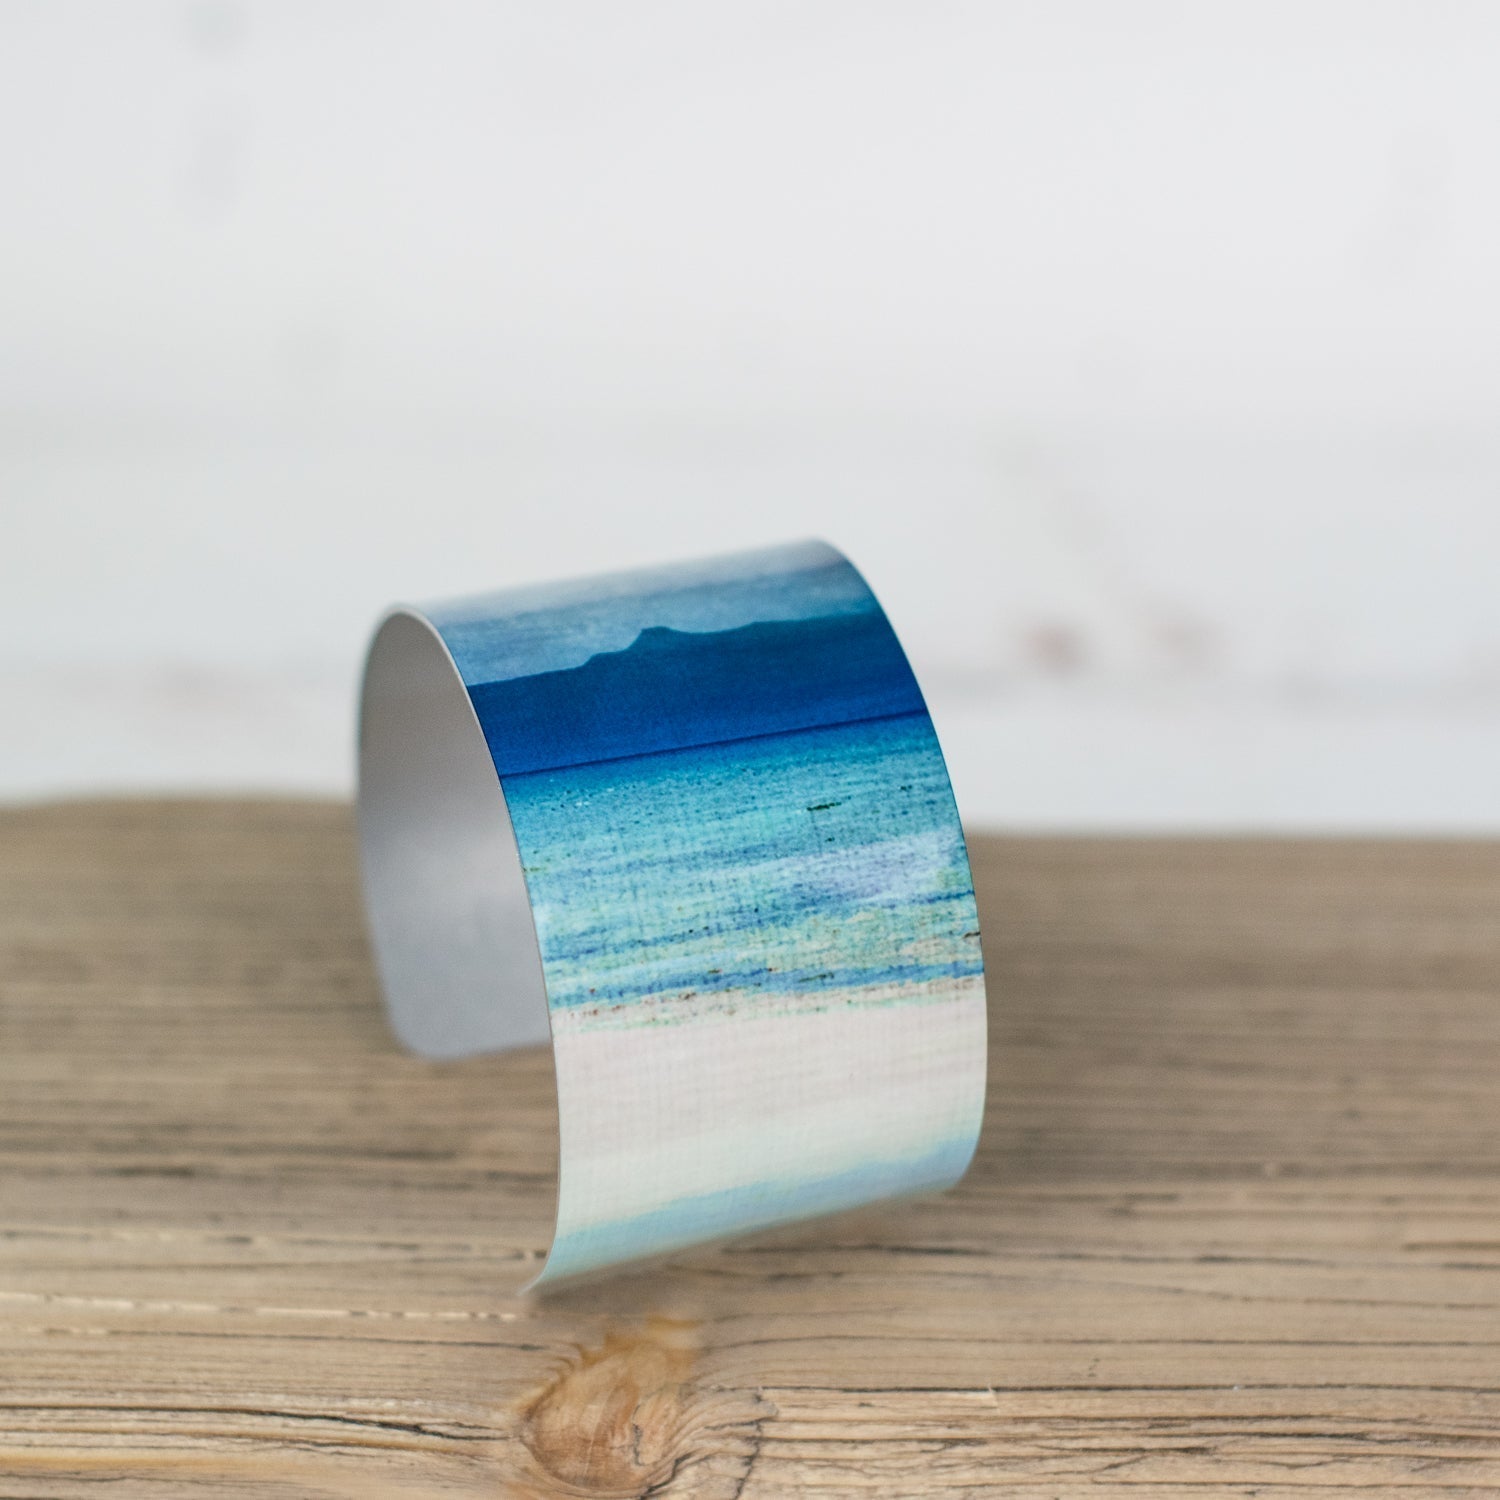 Skye and Raasay from Applecross Cuff Bangle | Cath Waters | Scottish Creations